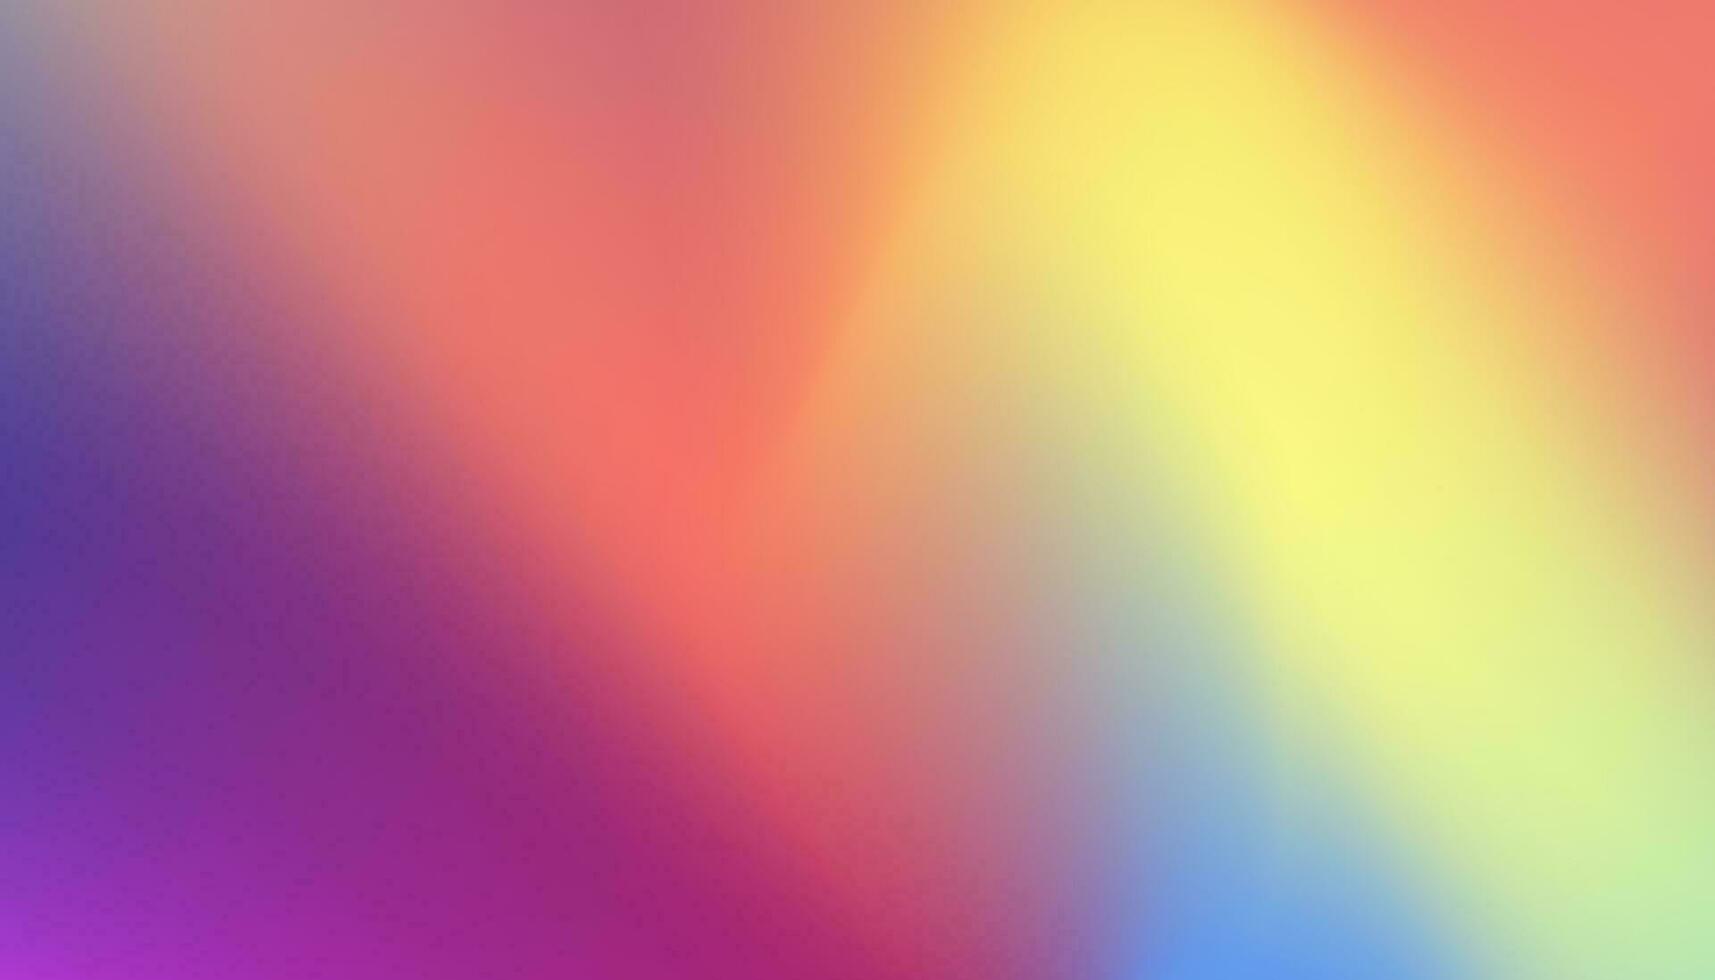 Abstract blurred gradient background with bright colors. Colorful smooth illustrations, for your graphic design, template, wallpaper, banner, poster or website vector